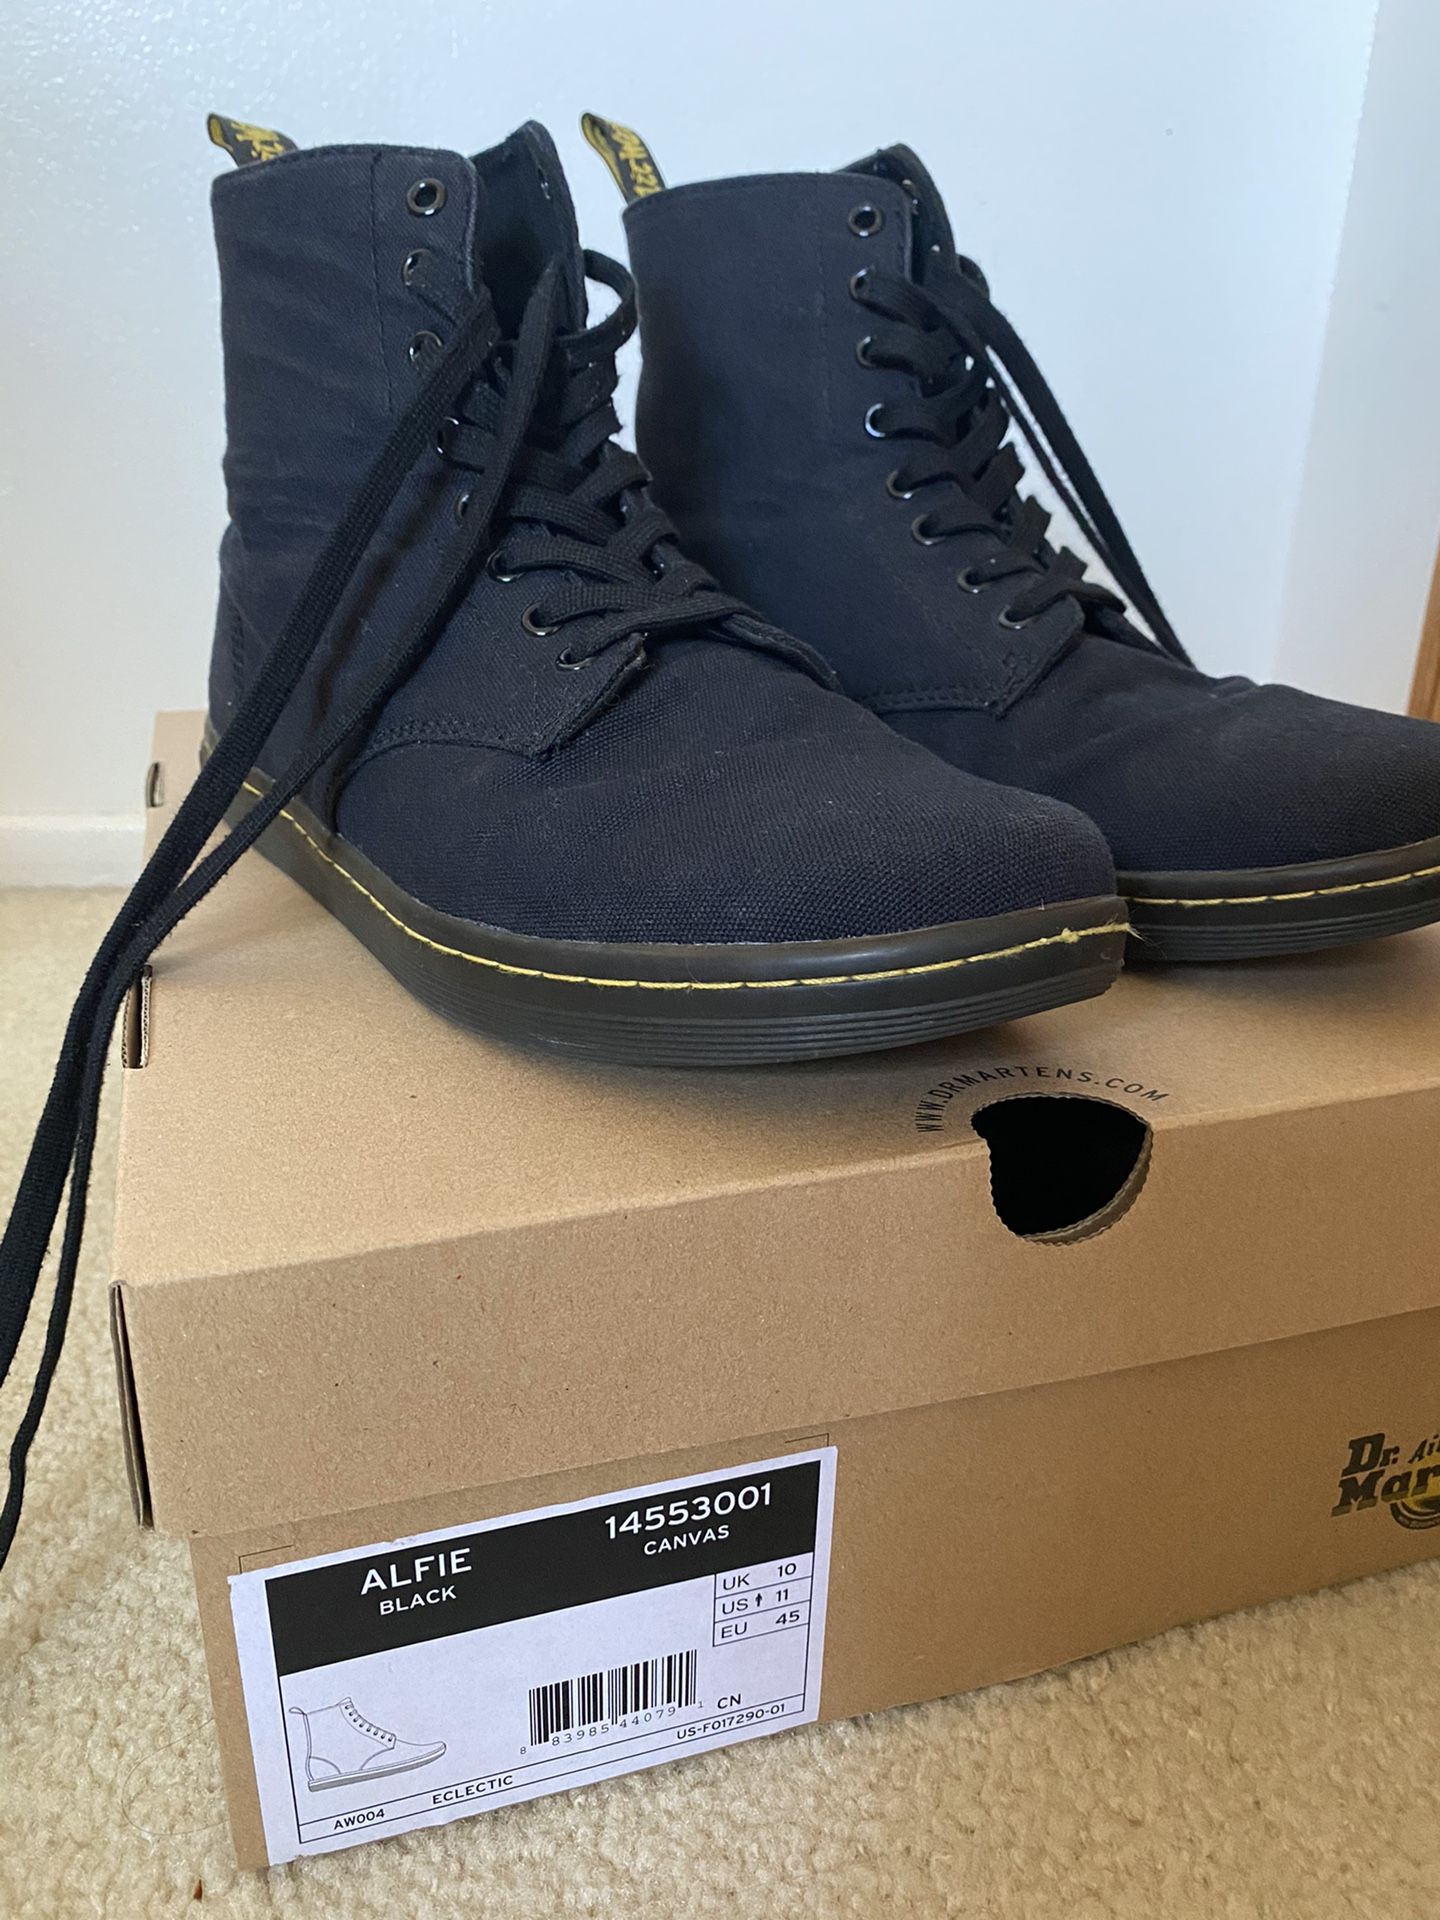 Dr. Martens Alfie canvas size 11 - used only ten times~